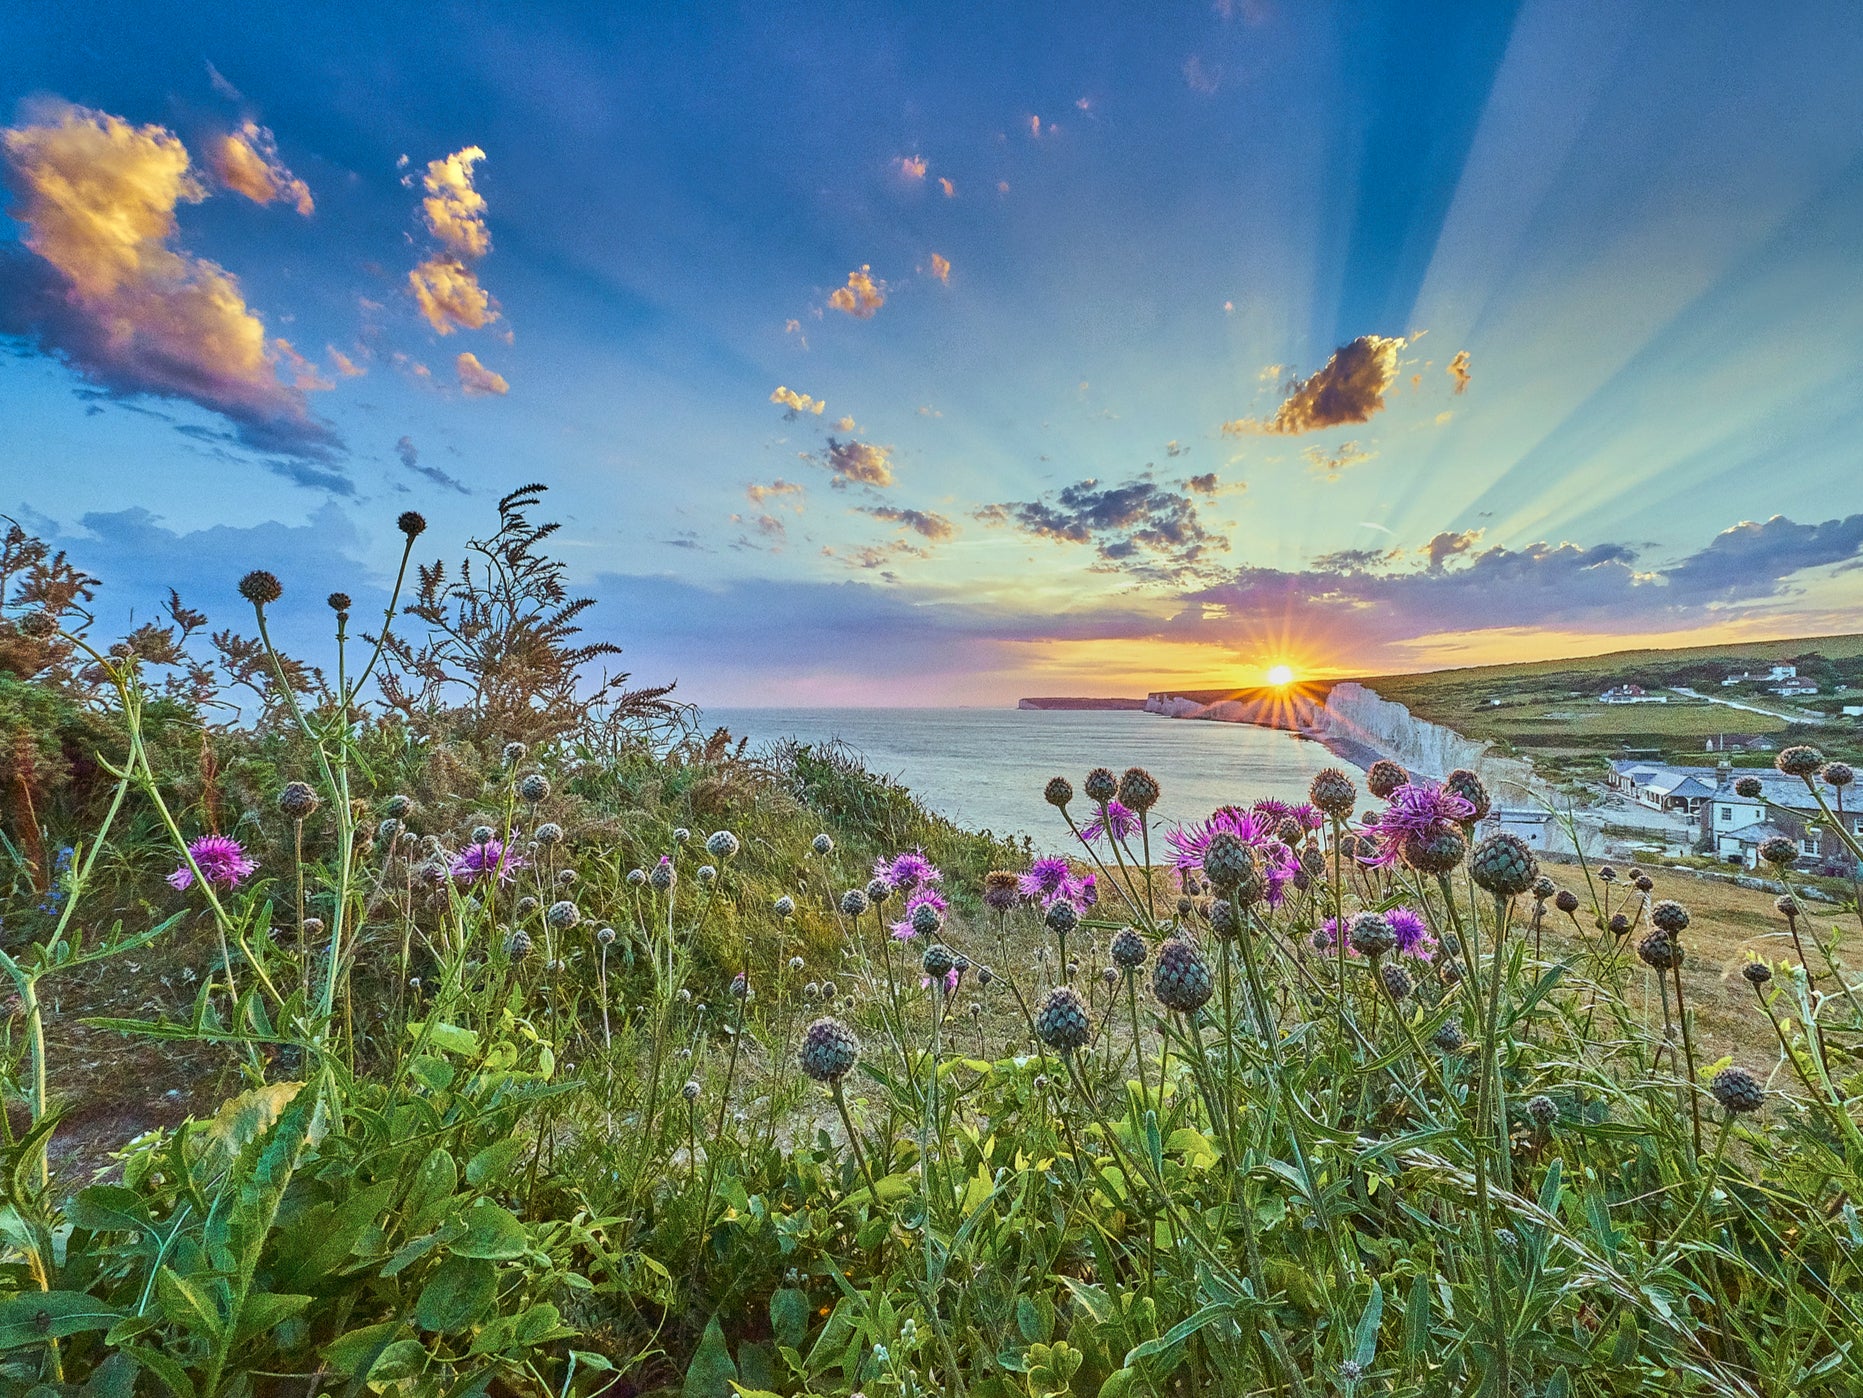 The National Trust’s Seven Sisters country park in East Sussex